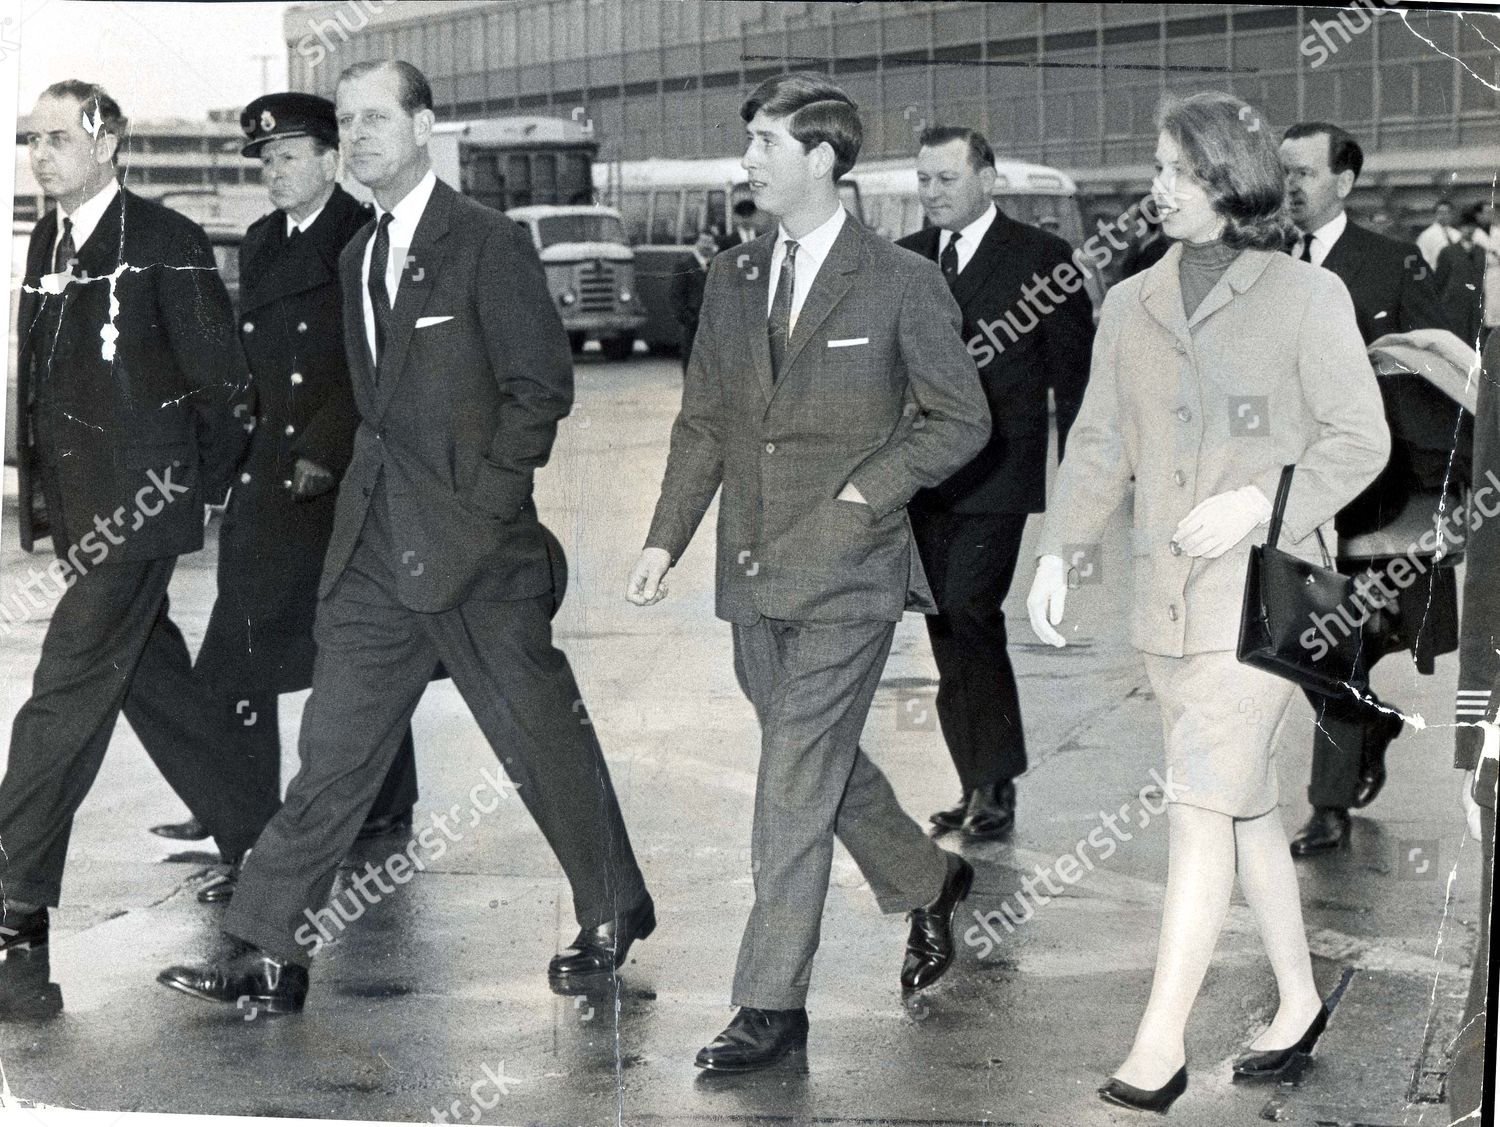 prince-of-wales-28th-january-1966-prince-philip-and-princess-anne-bid-farewell-to-prince-charles-as-he-leaves-london-for-geelong-school-australia-to-complete-his-three-month-term-royalty-shutterstock-editorial-892237a.jpg